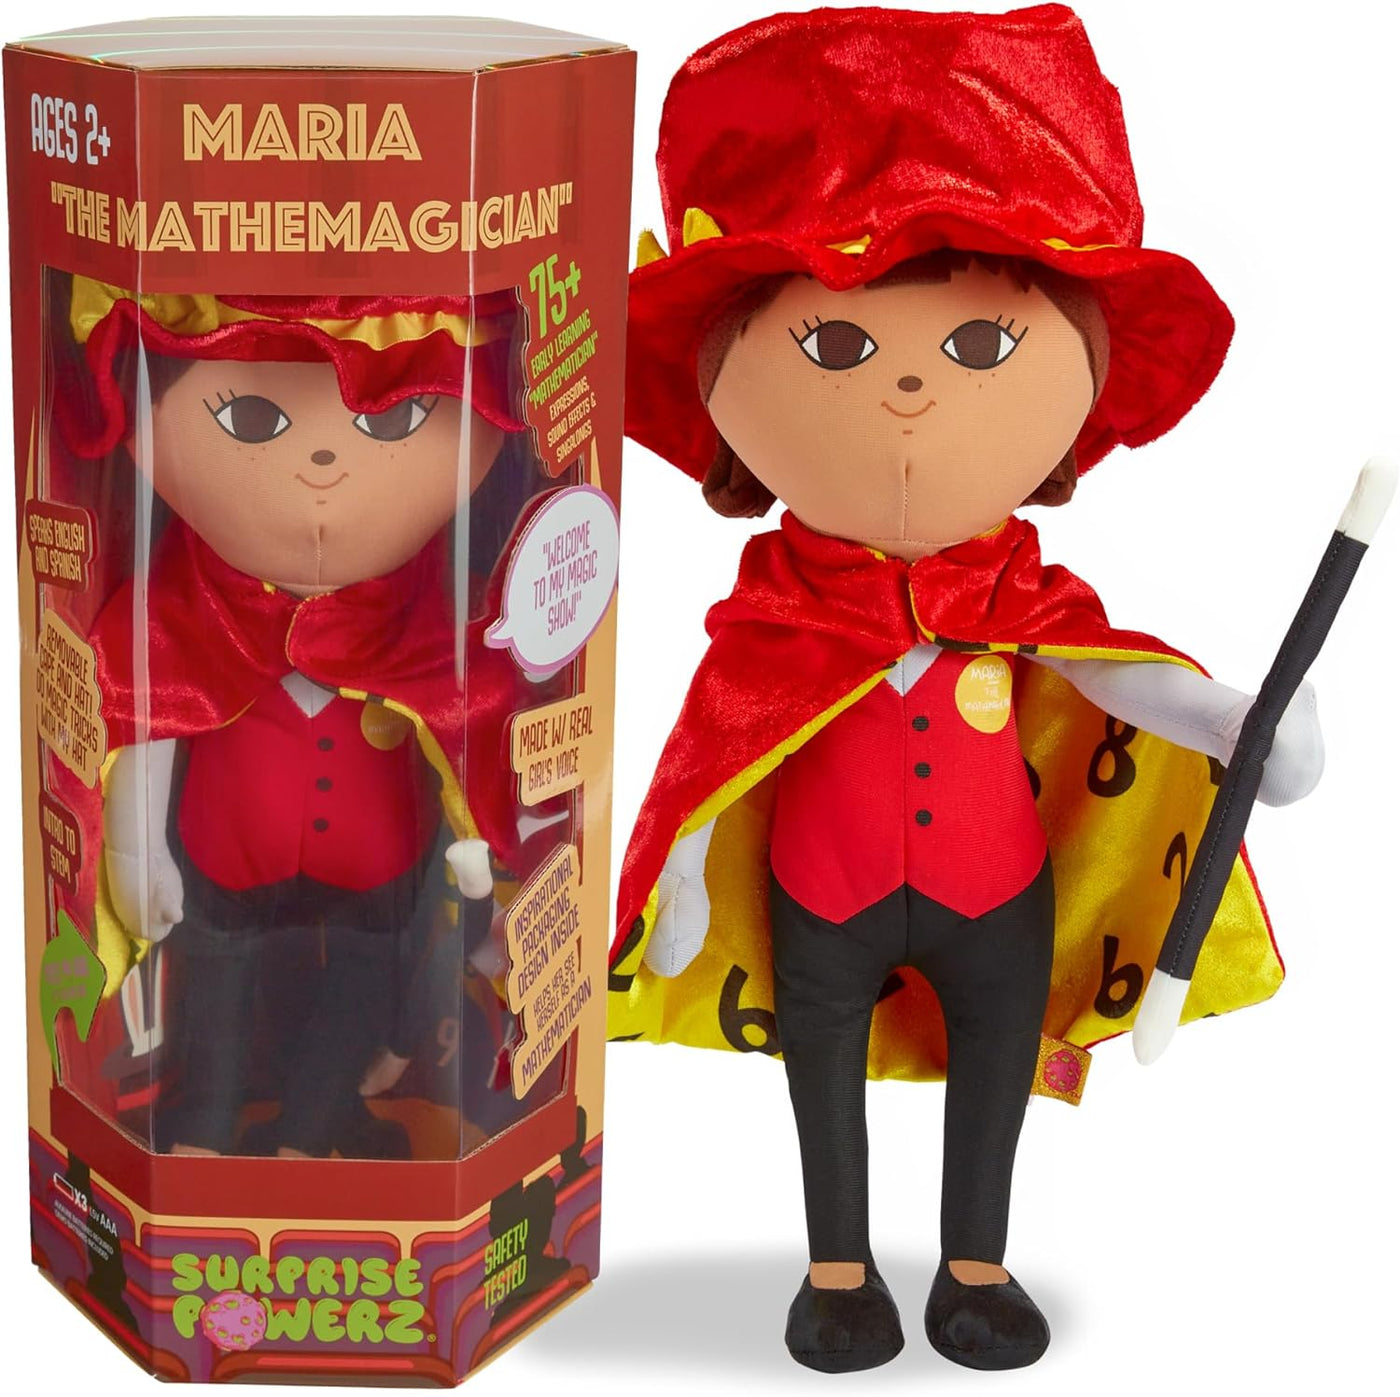 Surprise Powerz María The Mathemagician Plush Doll Girls Toys, 16" Latina Doll, Educational Play Gift, STEM Learning - 2-5 Year Old Girl Toy, Toddler & Preschool Pretend Dolls